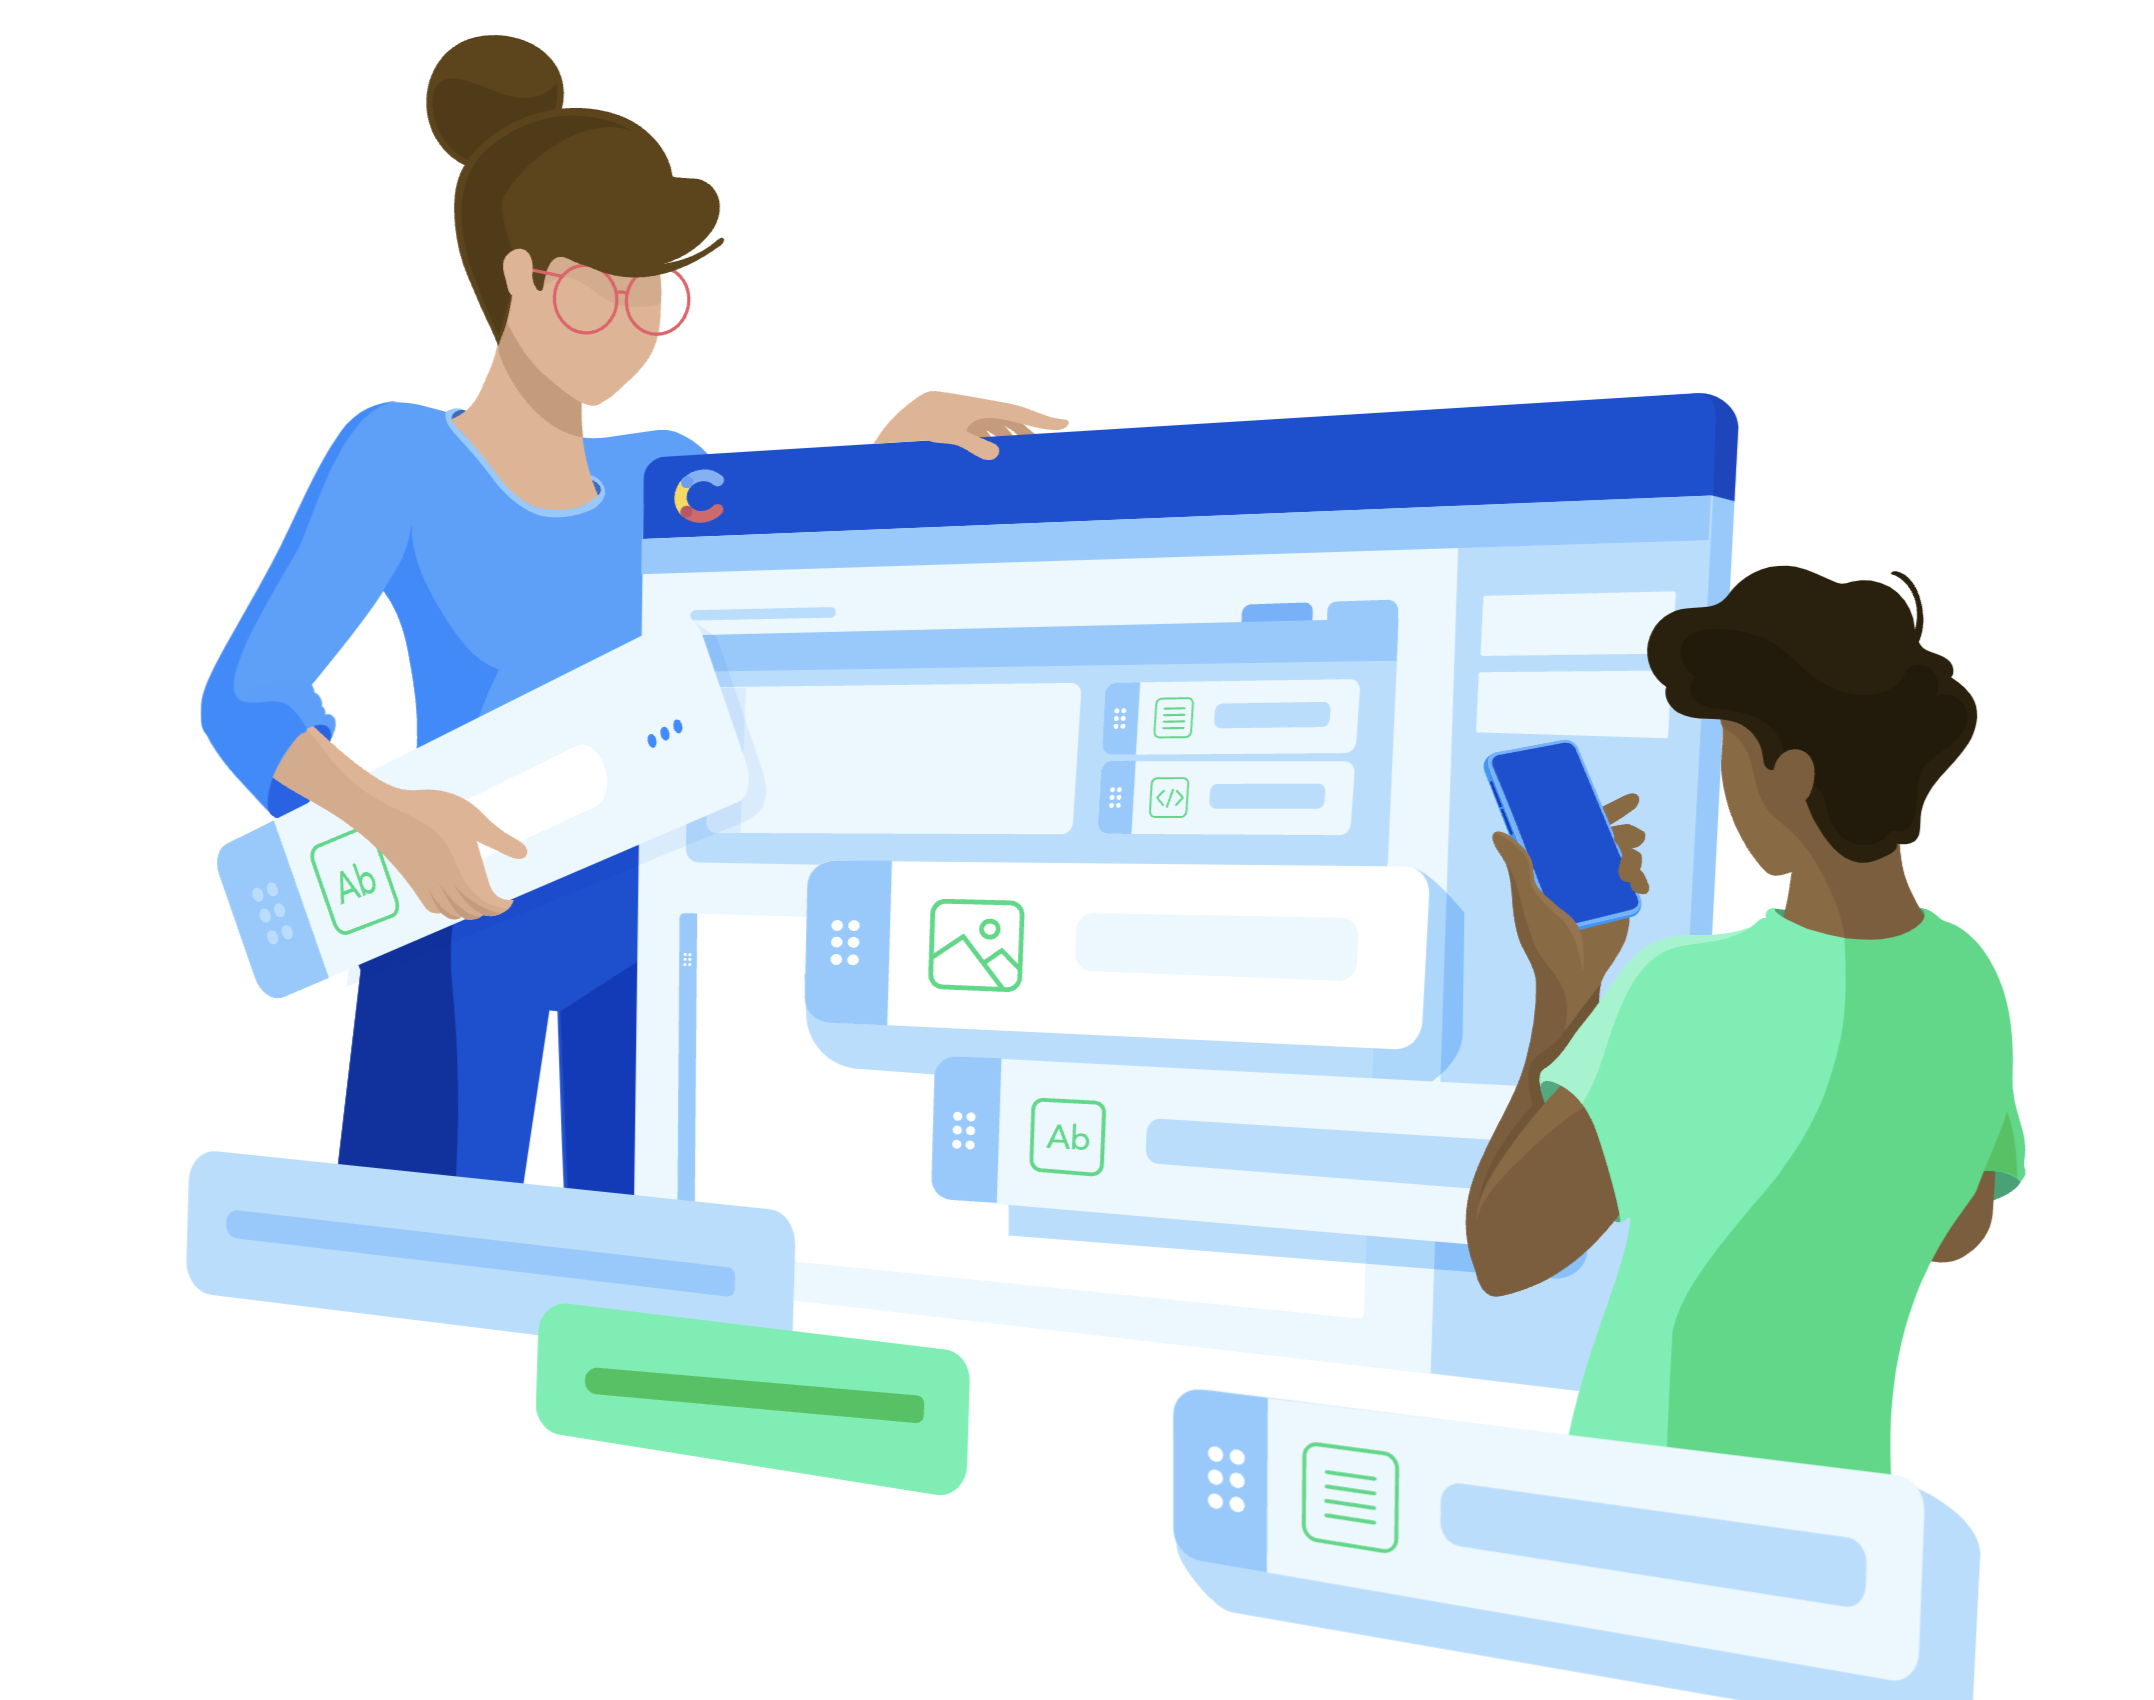 Contentful illustration with people working on a big computer screen